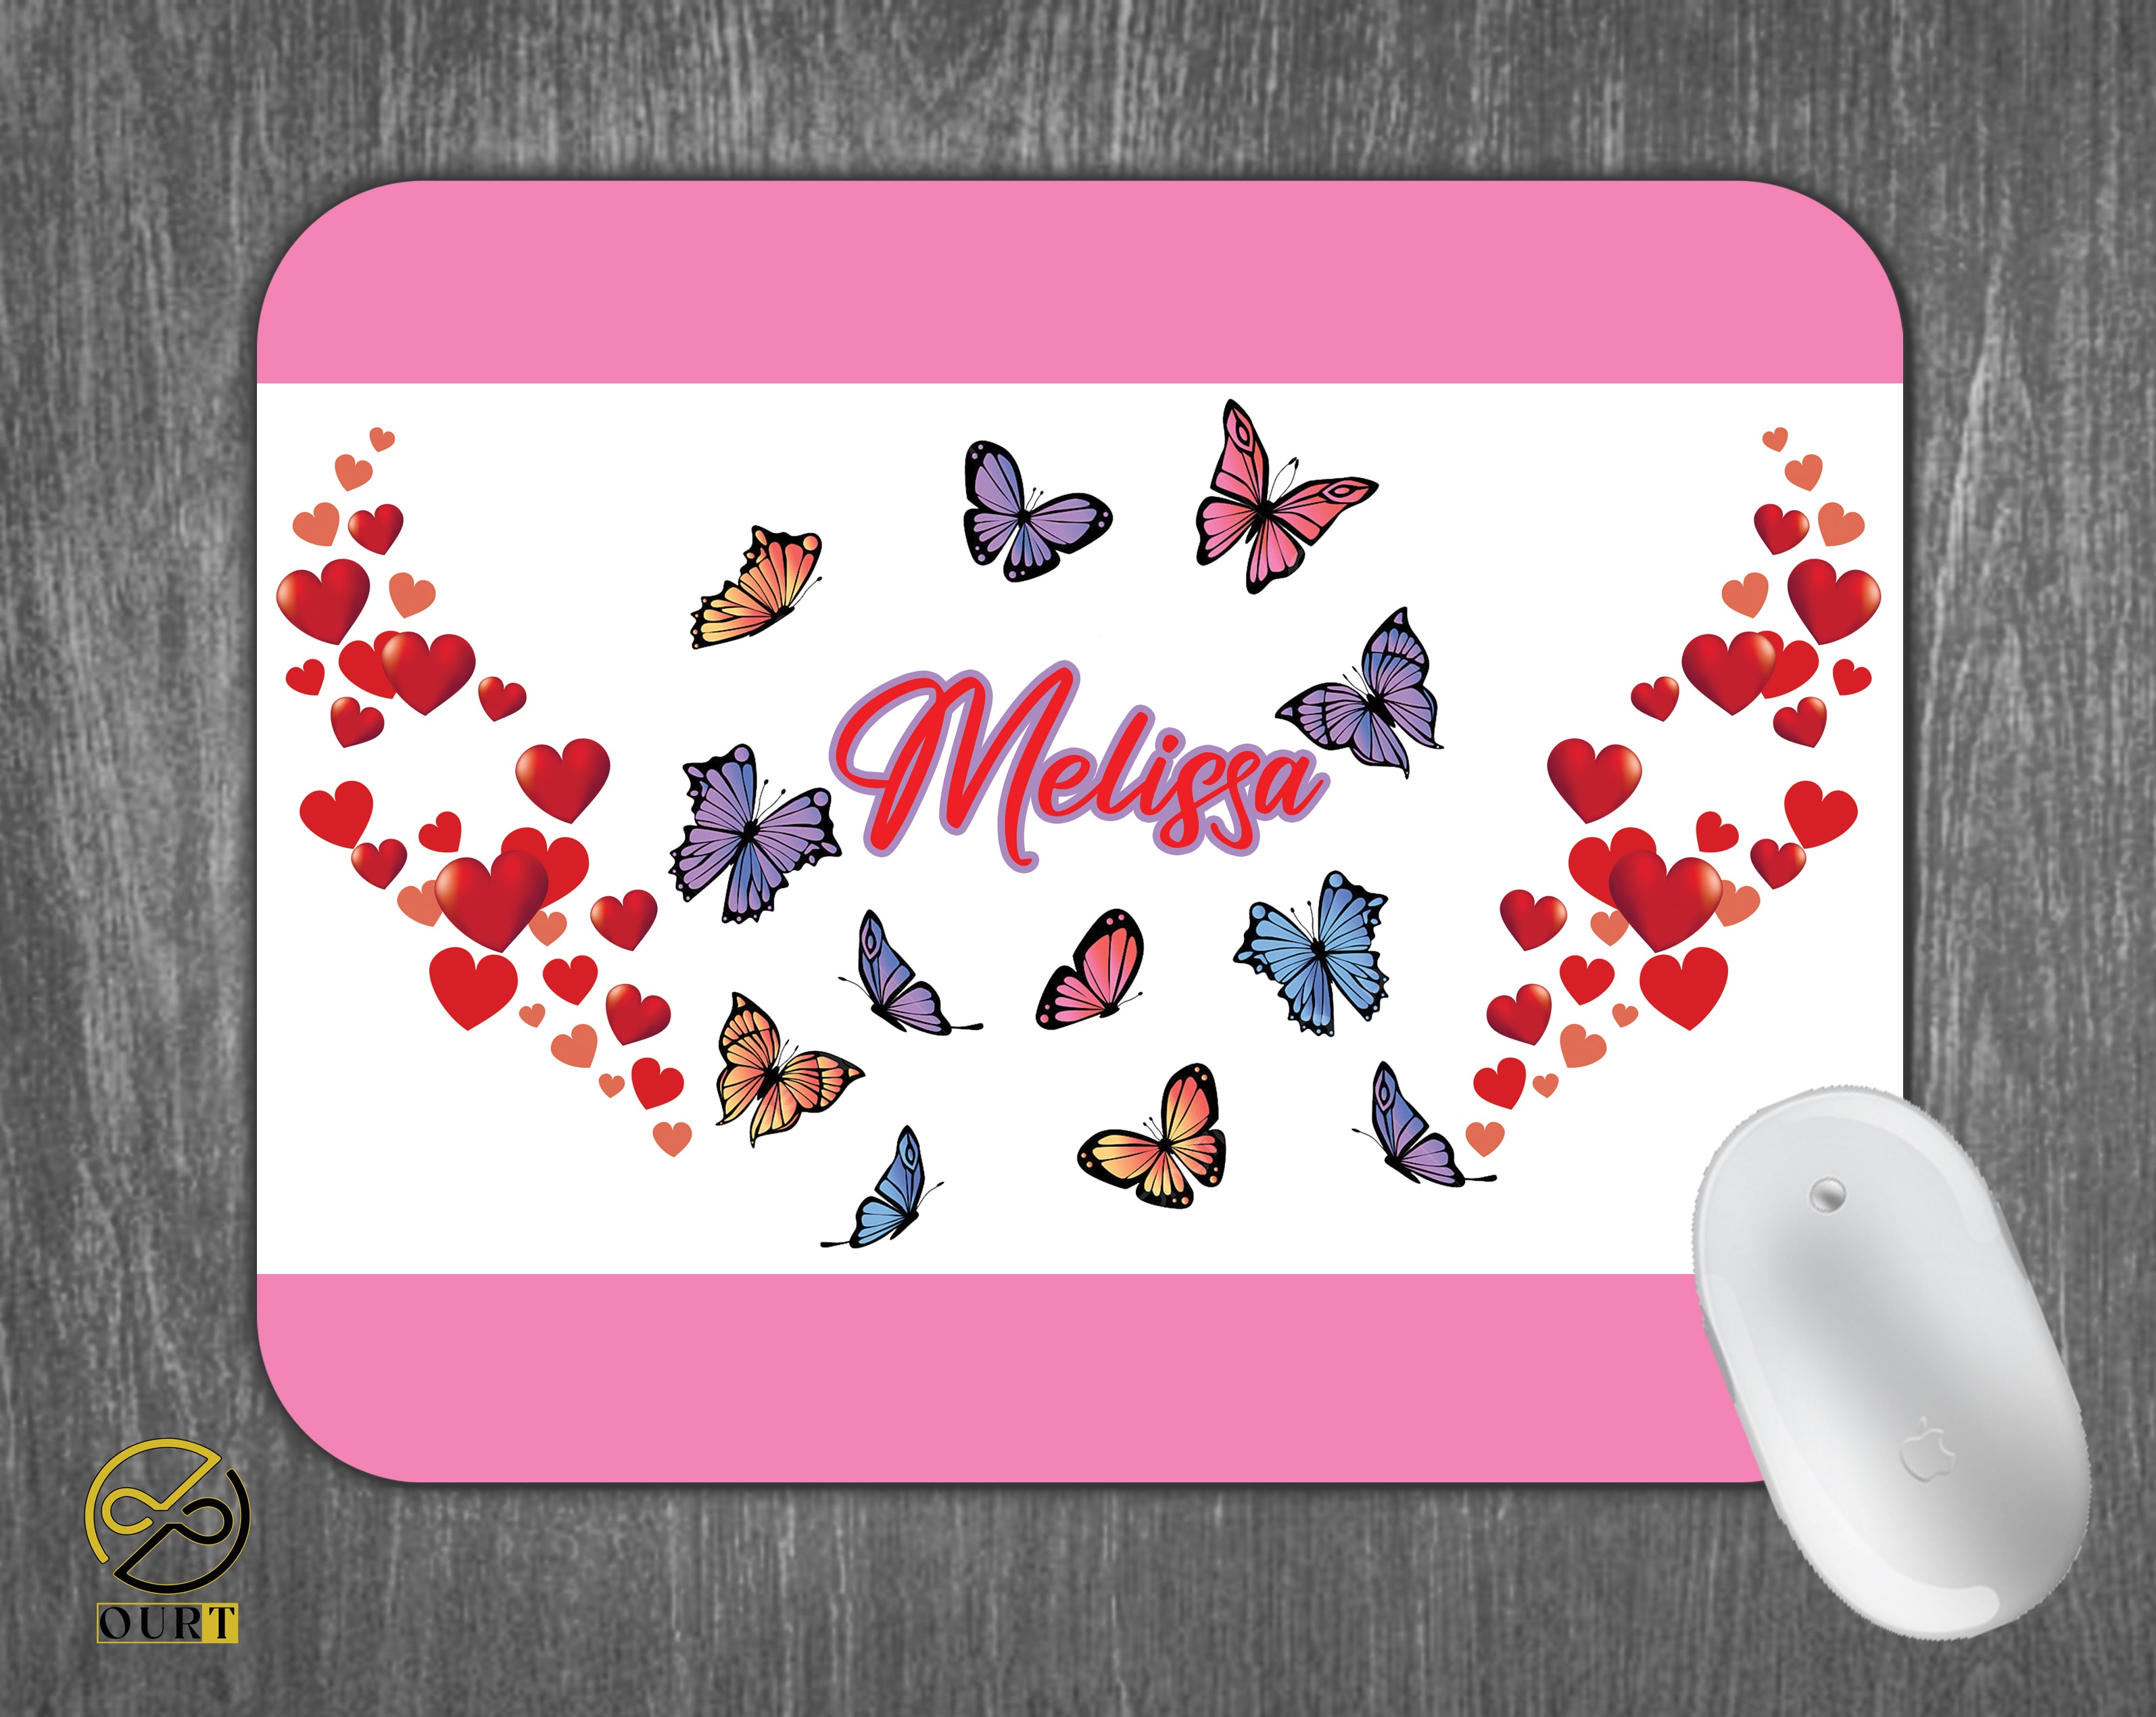 Custom Mouse Pad | Any Image, Design, Logo or Text - Ourt